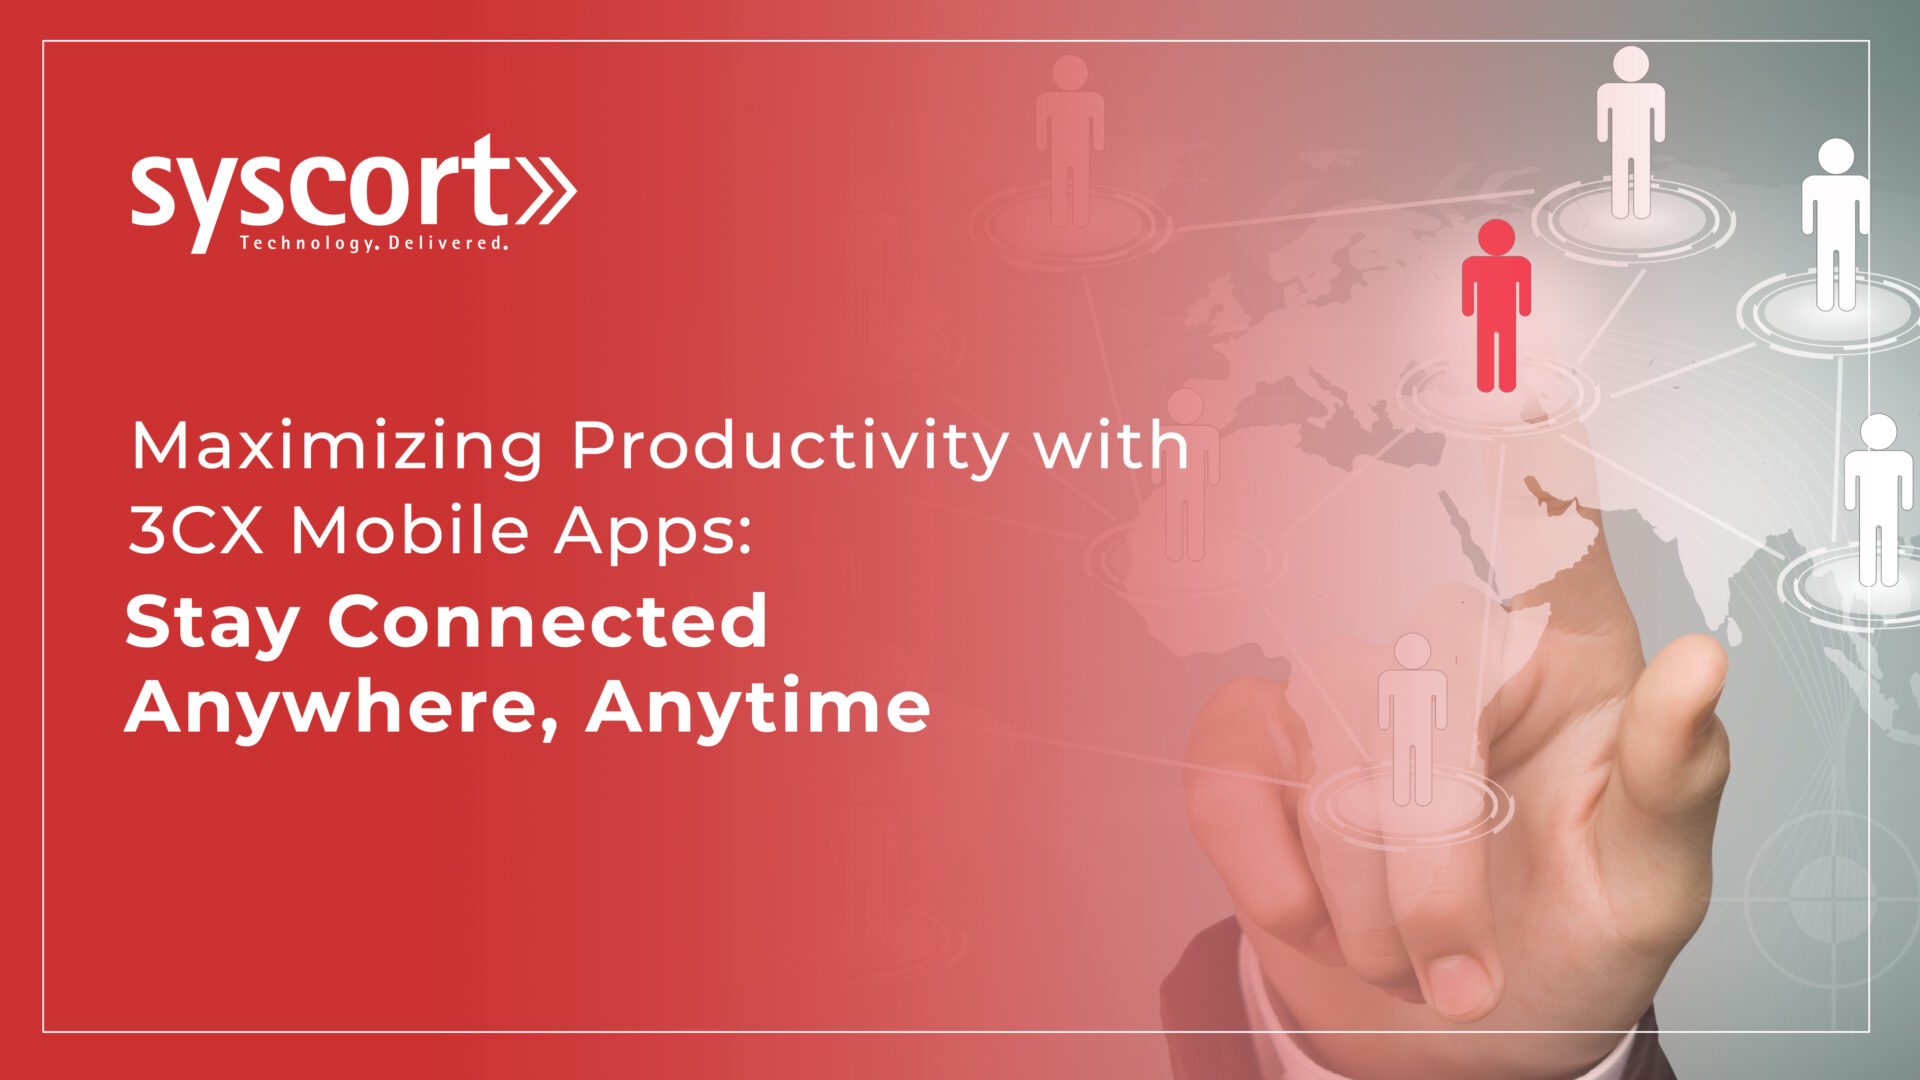 Maximizing Productivity with 3CX Mobile Apps: Stay Connected Anywhere, Anytime